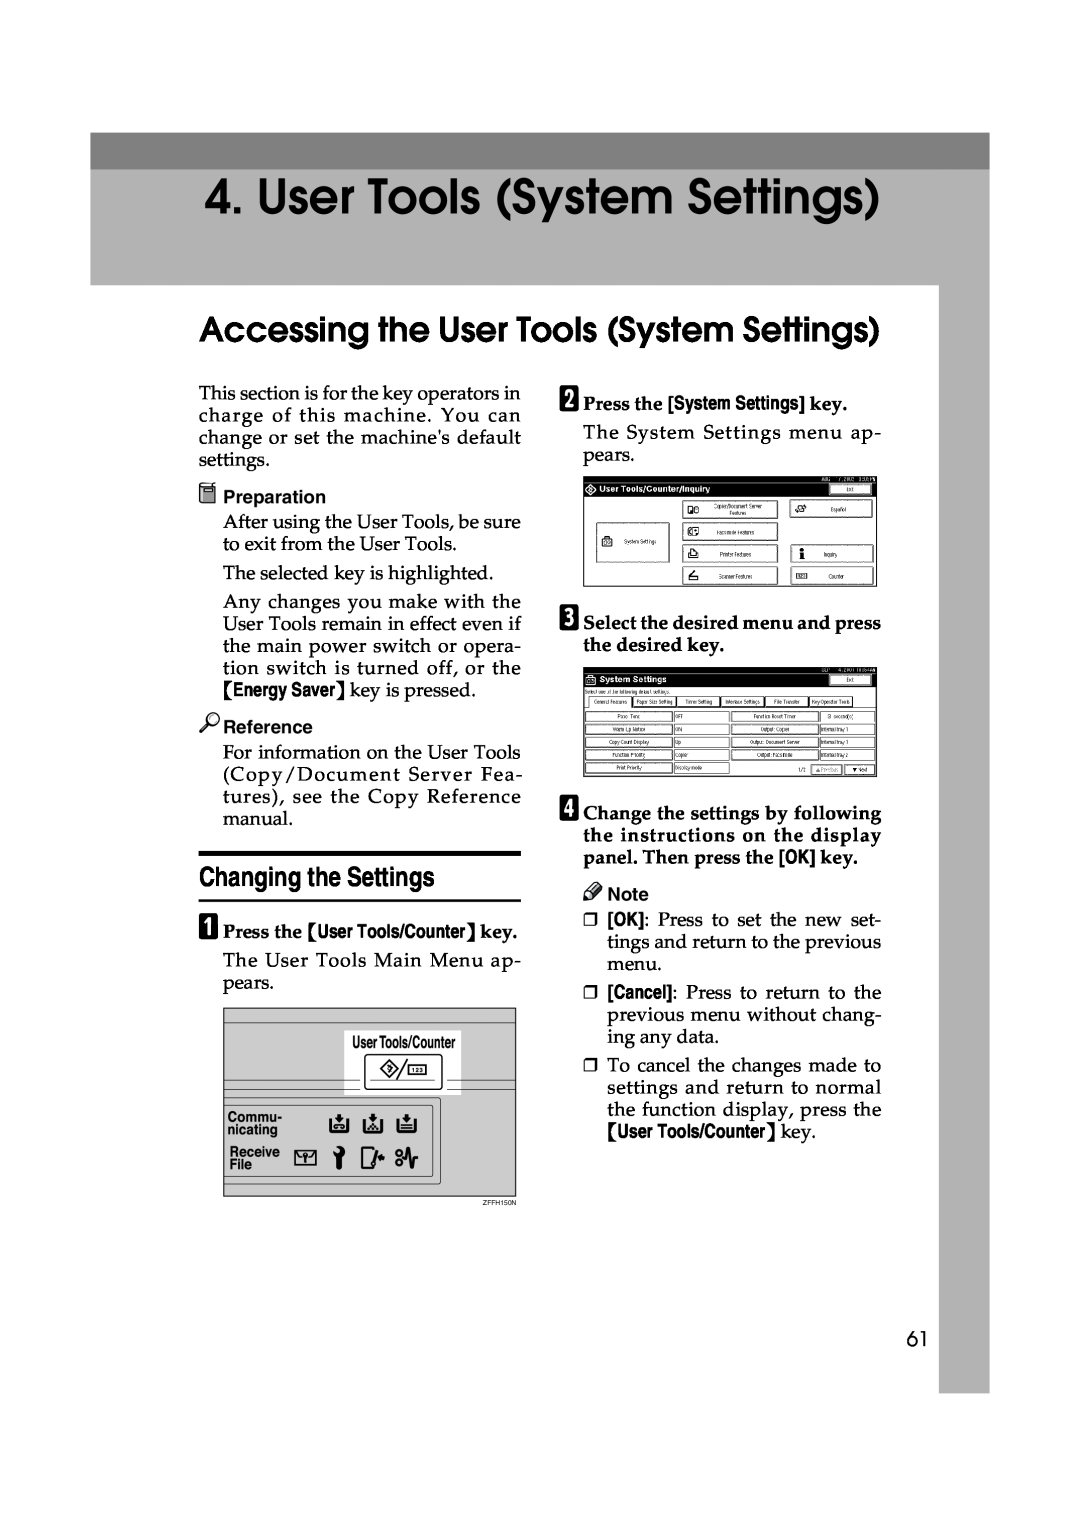 Lanier 5622 AG Accessing the User Tools System Settings, Changing the Settings, A Press the User Tools/Counter key 